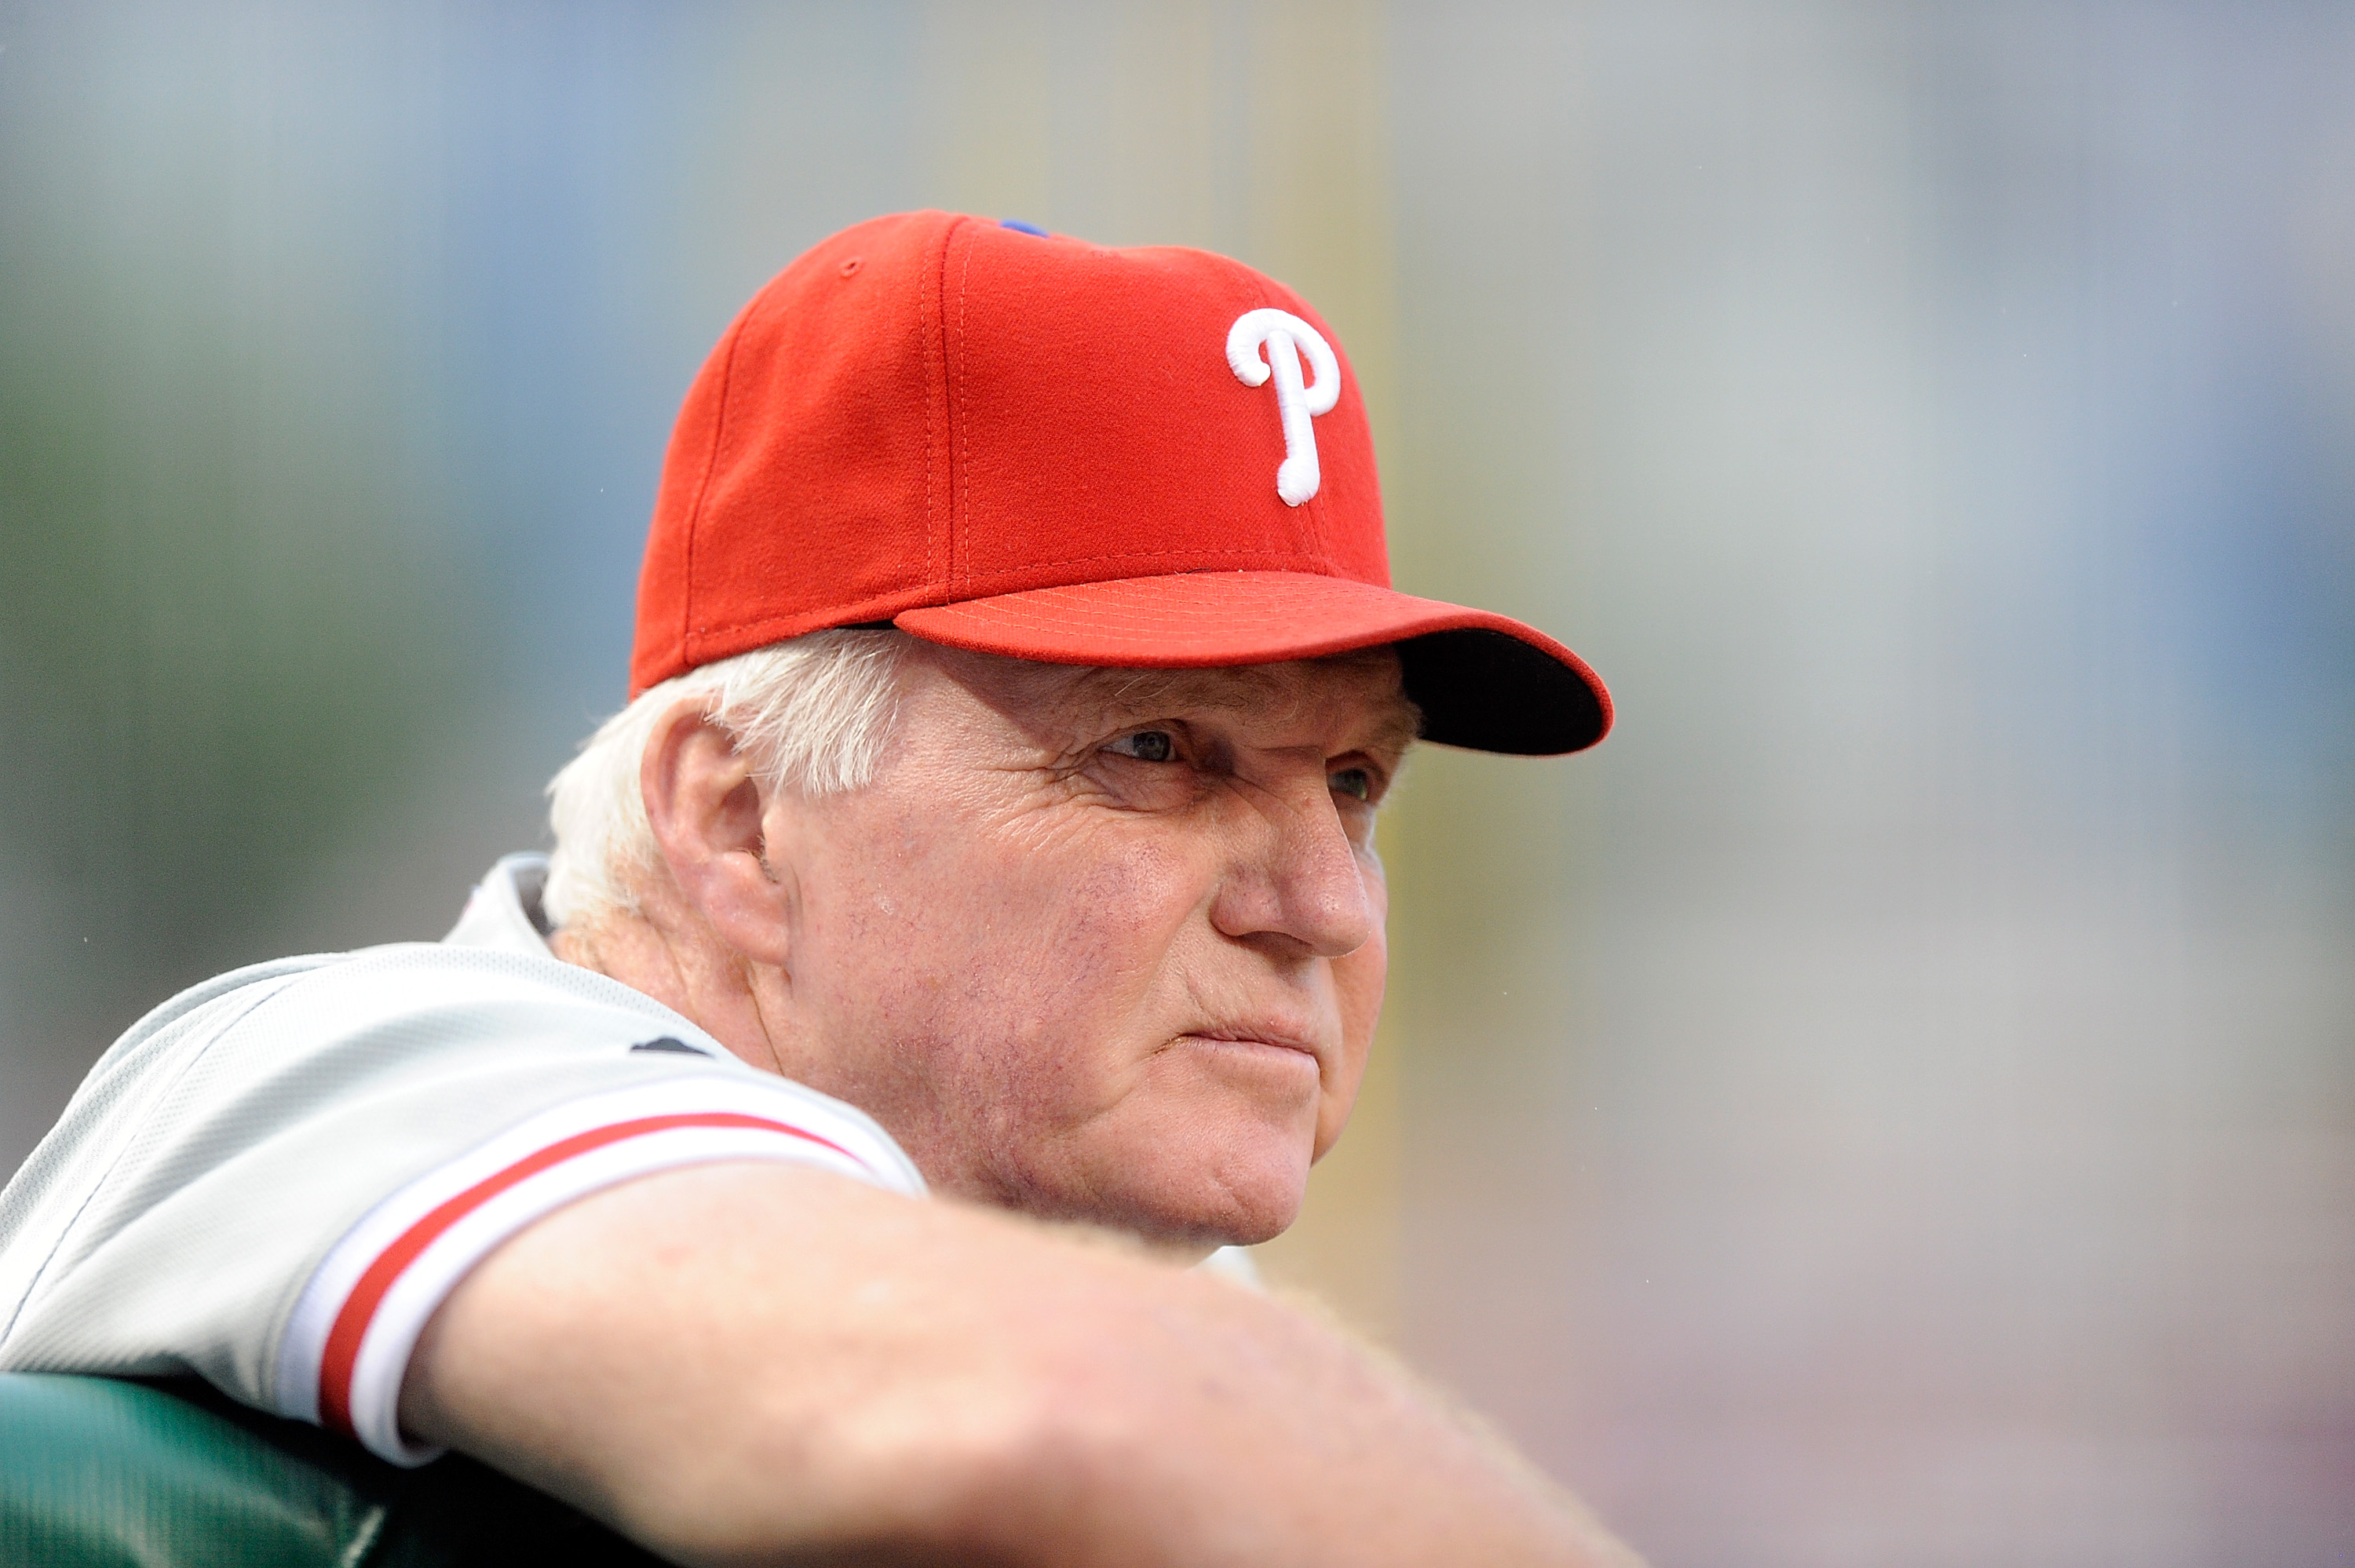 Phillies Former Manager Charlie Manuel Likes Young Hitters